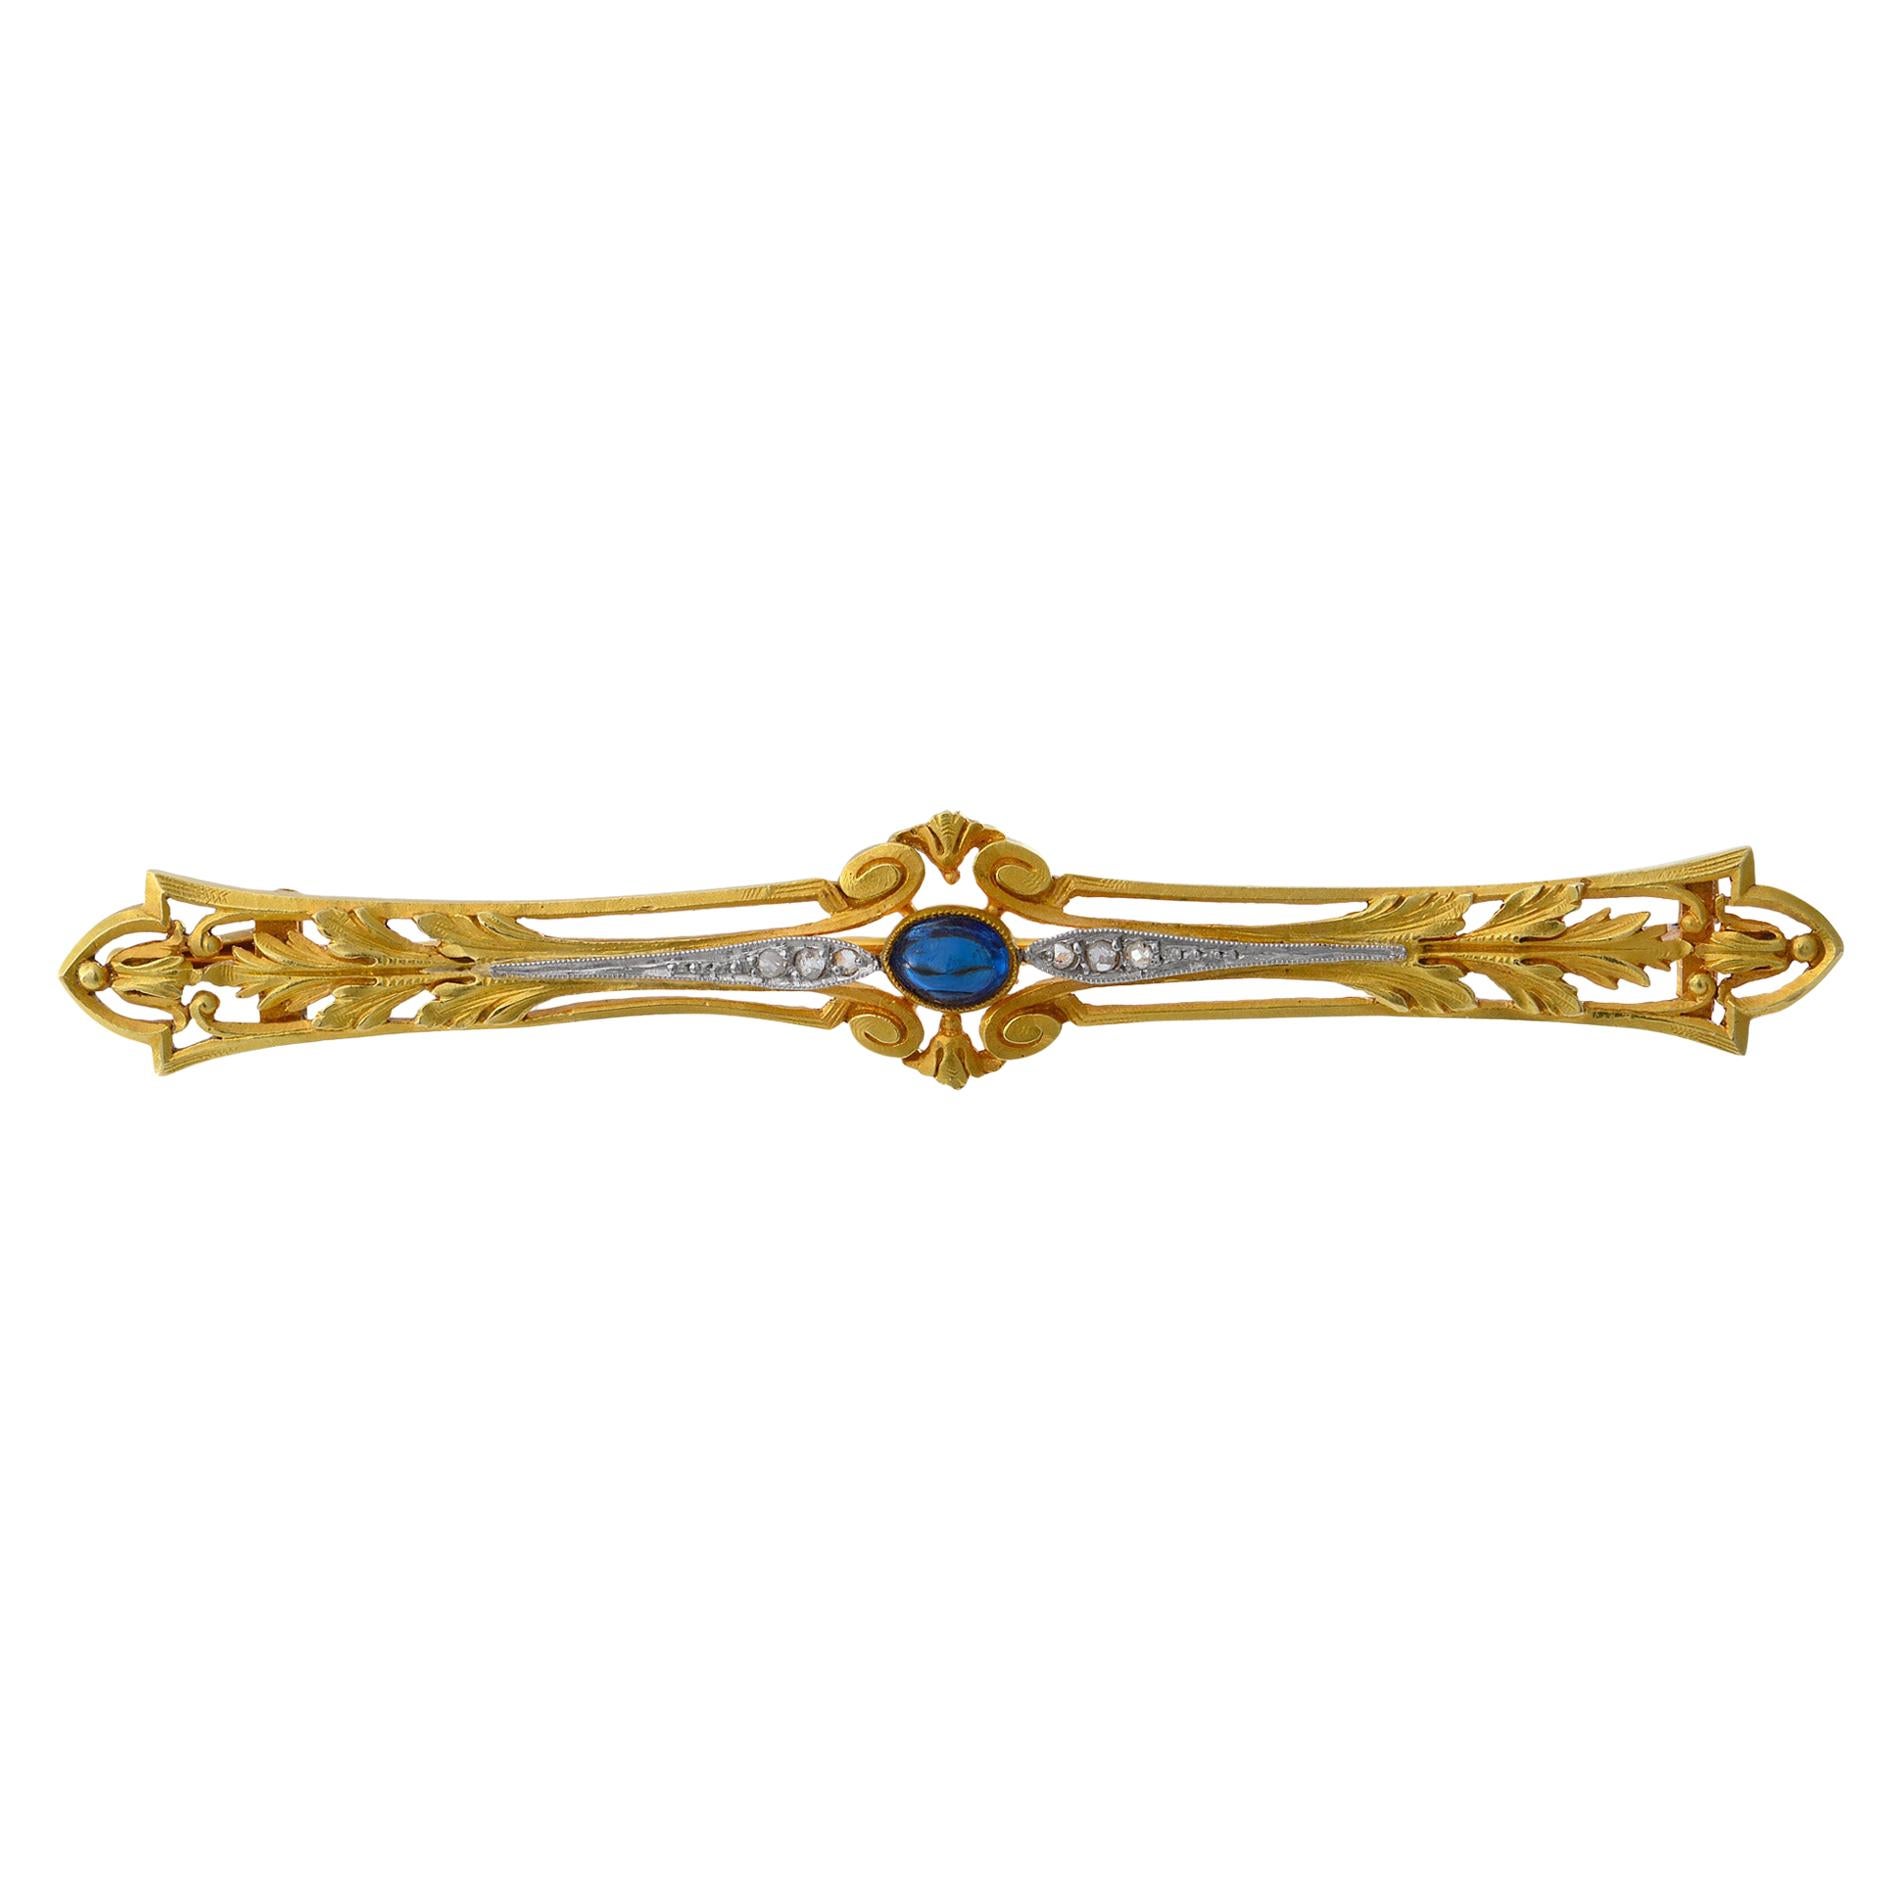 French Platinum, Gold, Cabochon Sapphire and Diamond Brooch